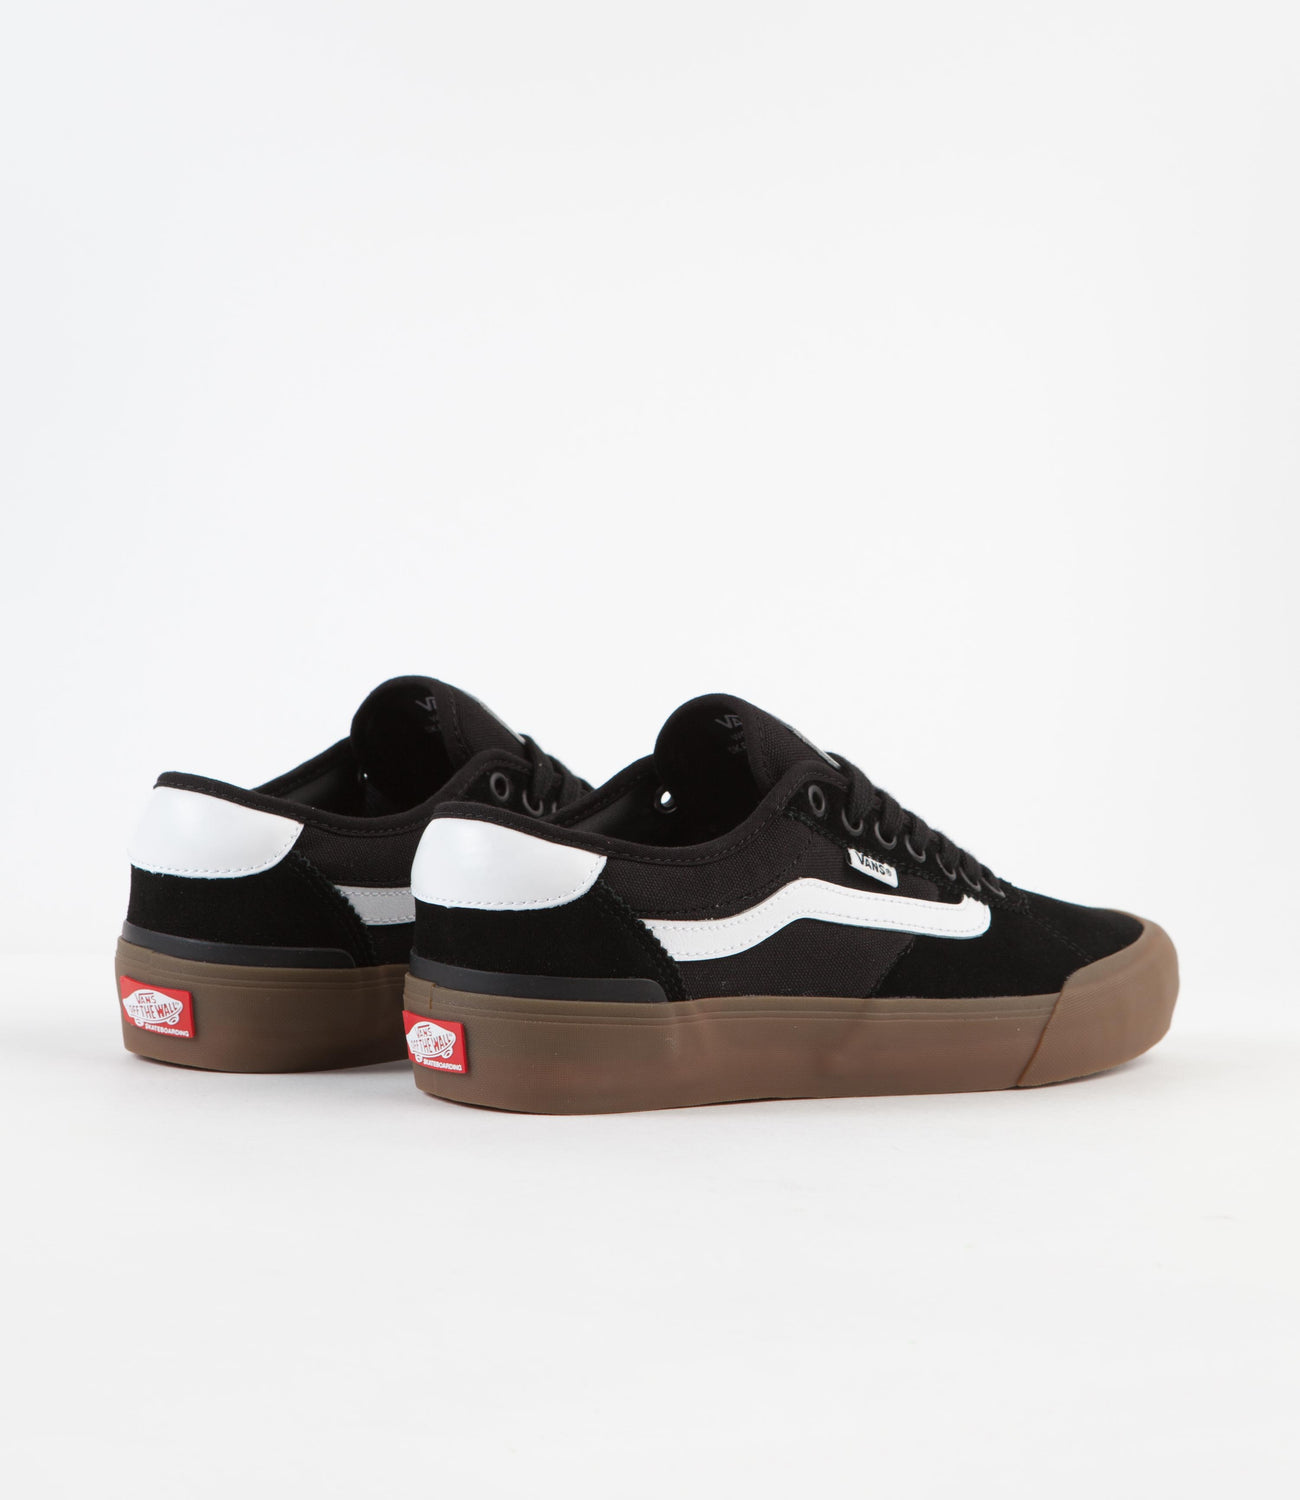 vans off the wall shoes black and brown